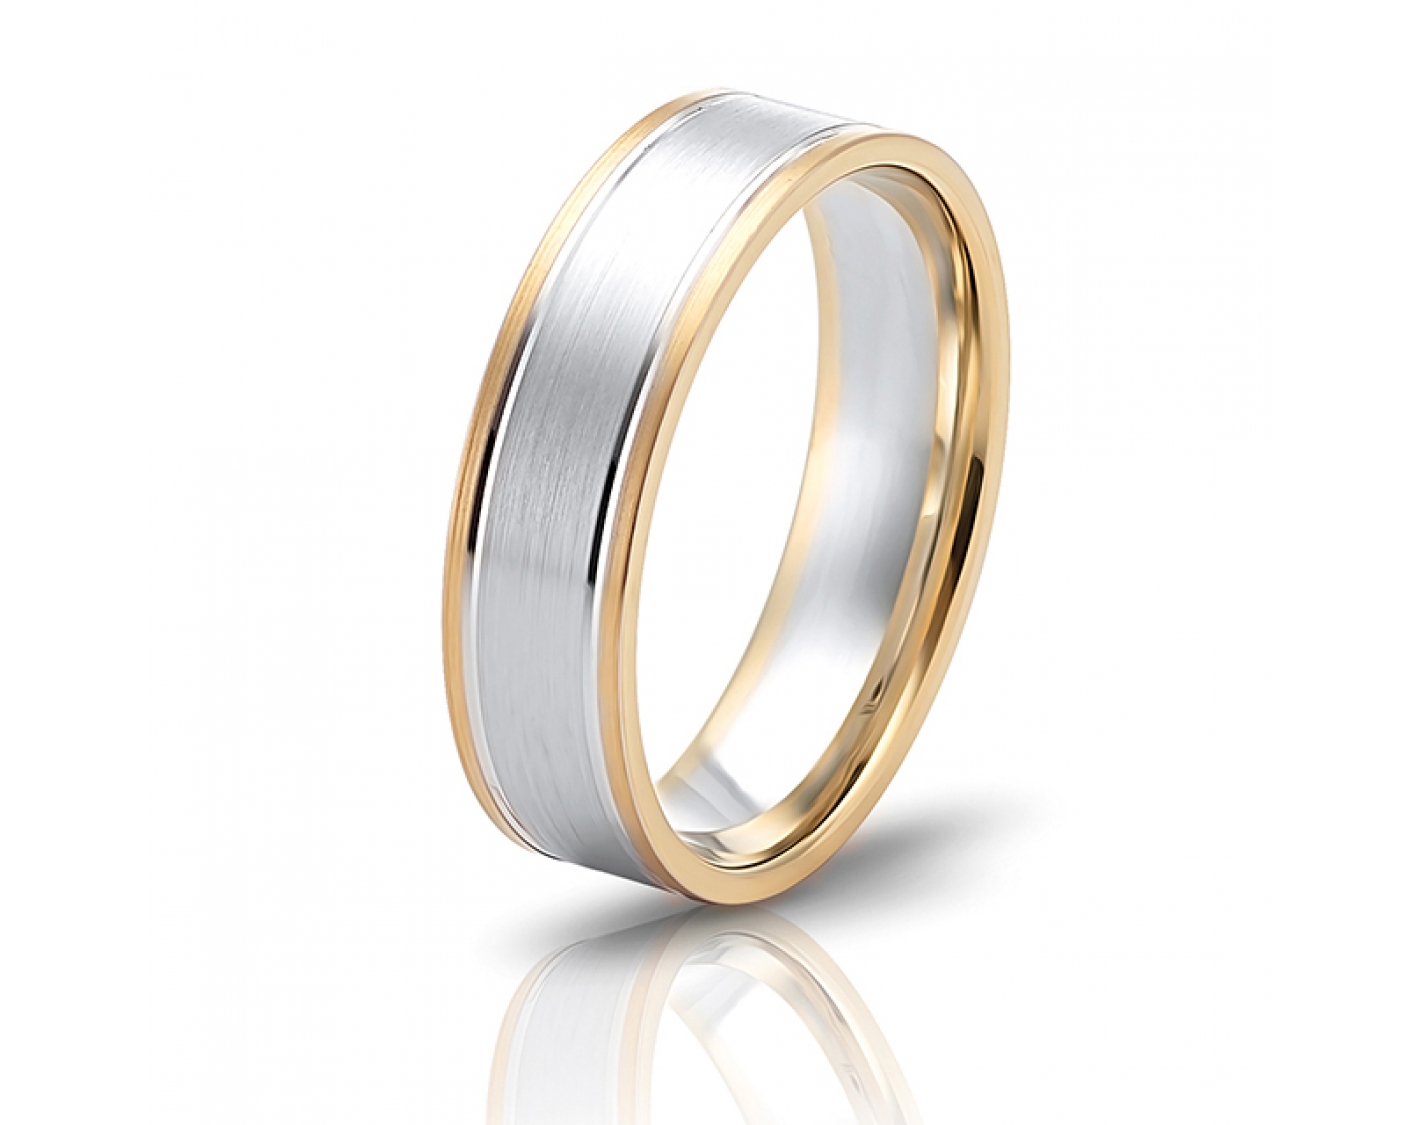 18k yellow gold 6mm two-toned* matte wedding band with colored edges